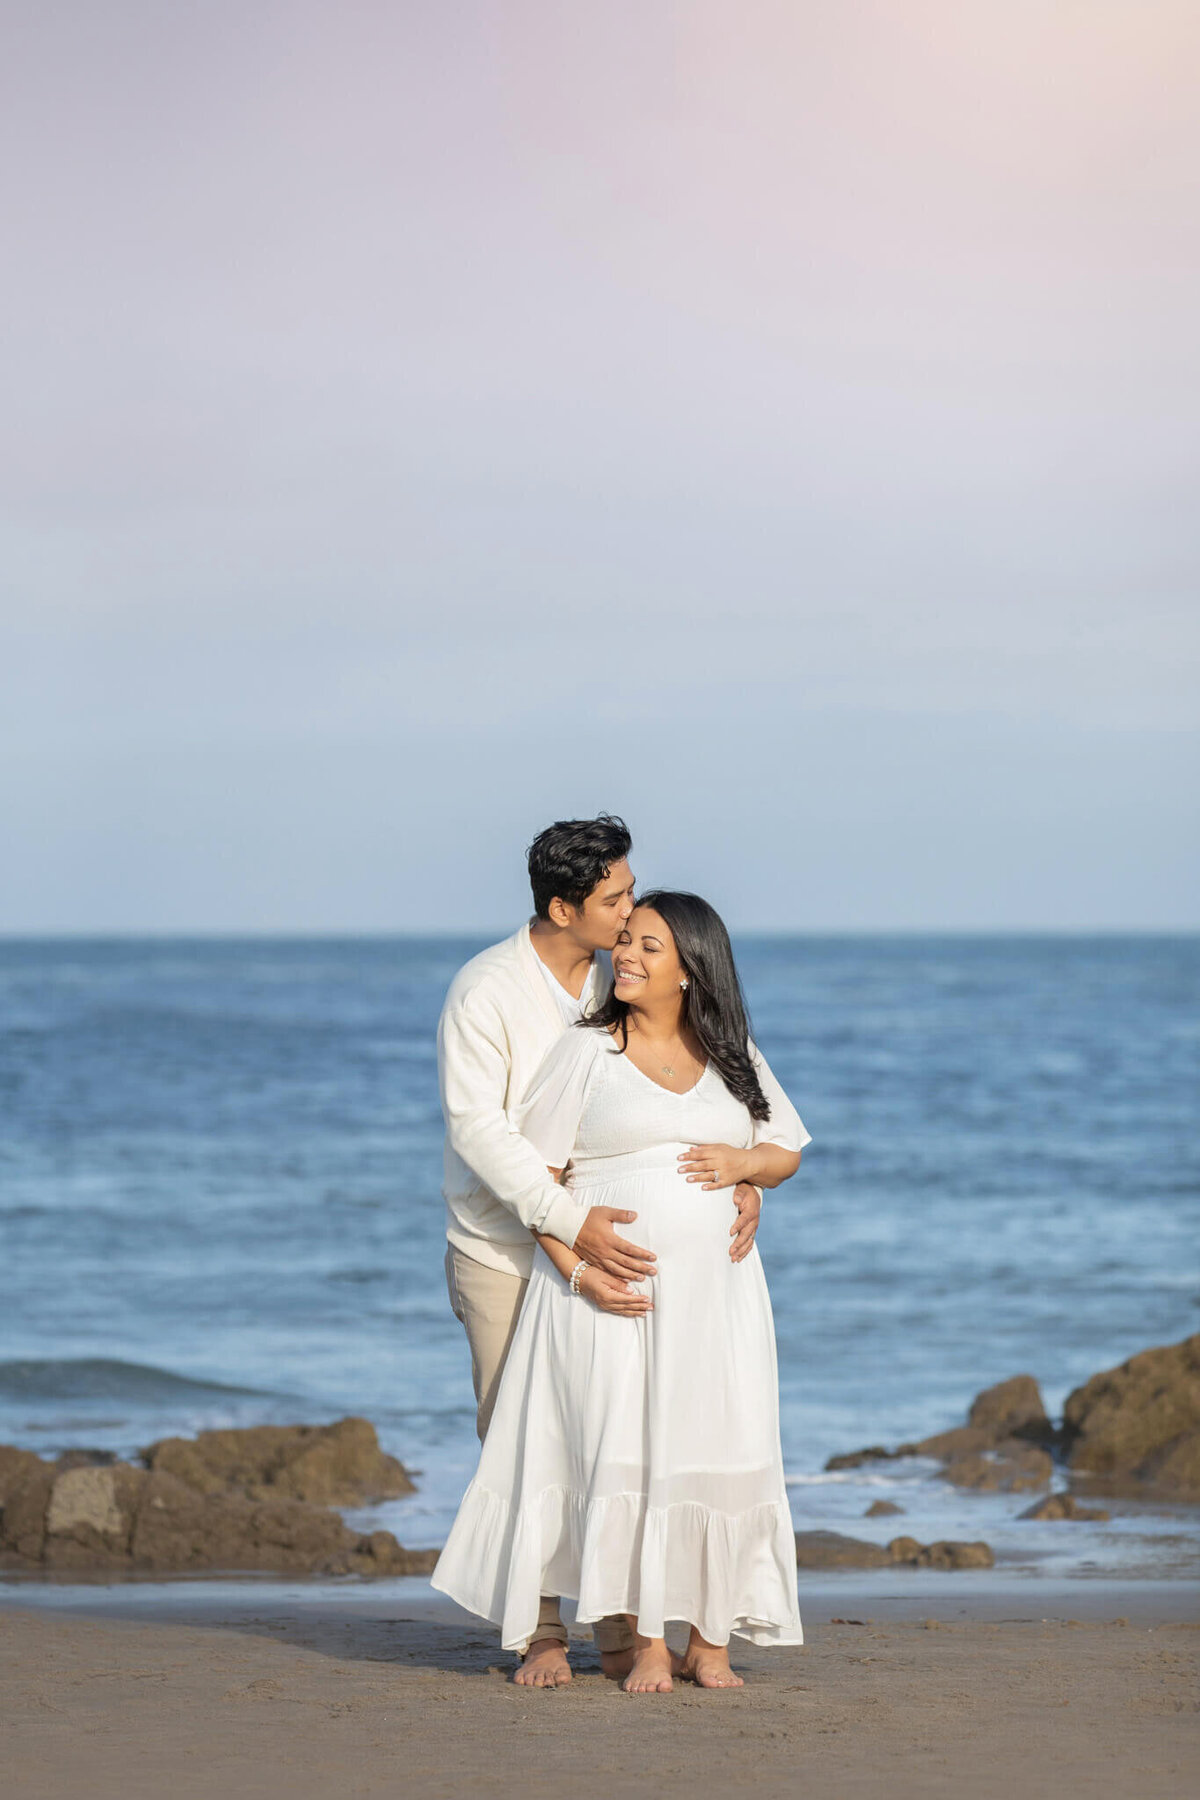 New mom and dad at Leo Carillo beach in Malibu at maternity photoshoot, dad kissing mom on the head, image by Los Angeles Maternity Photographer